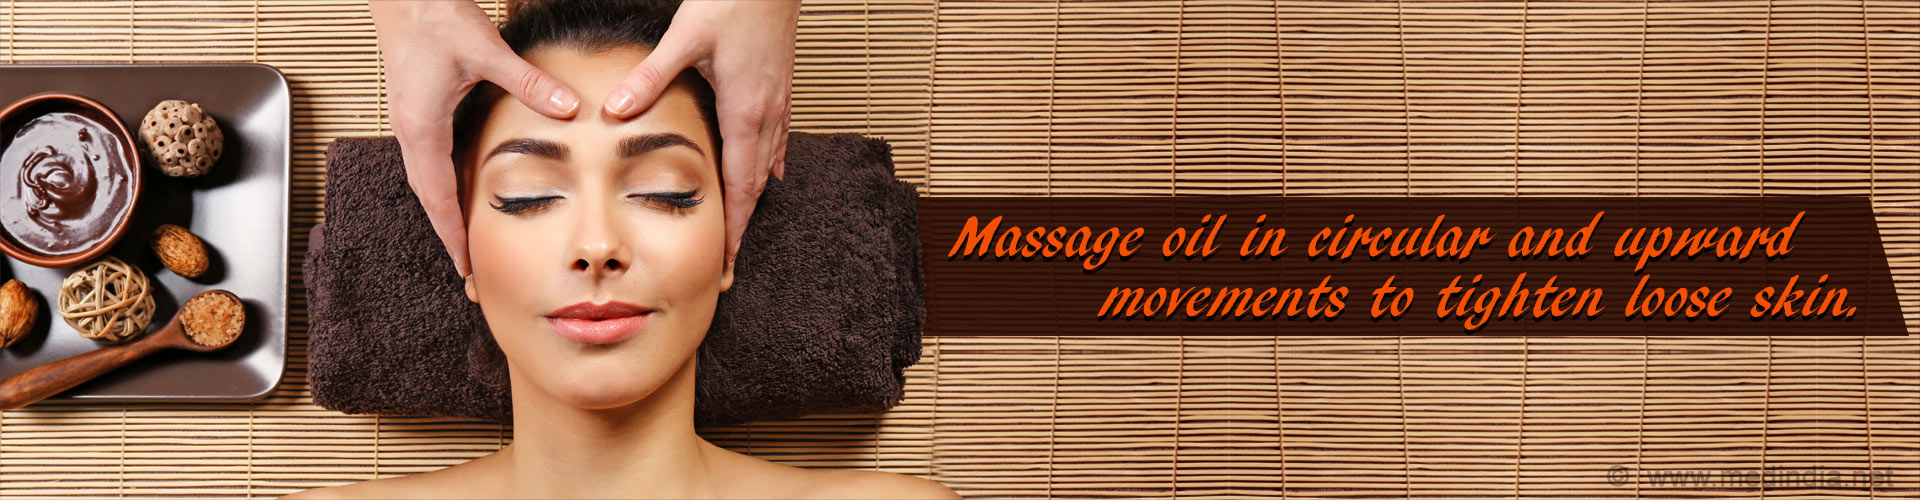 Massage oil in circular and upward movements to tighten loose skin.